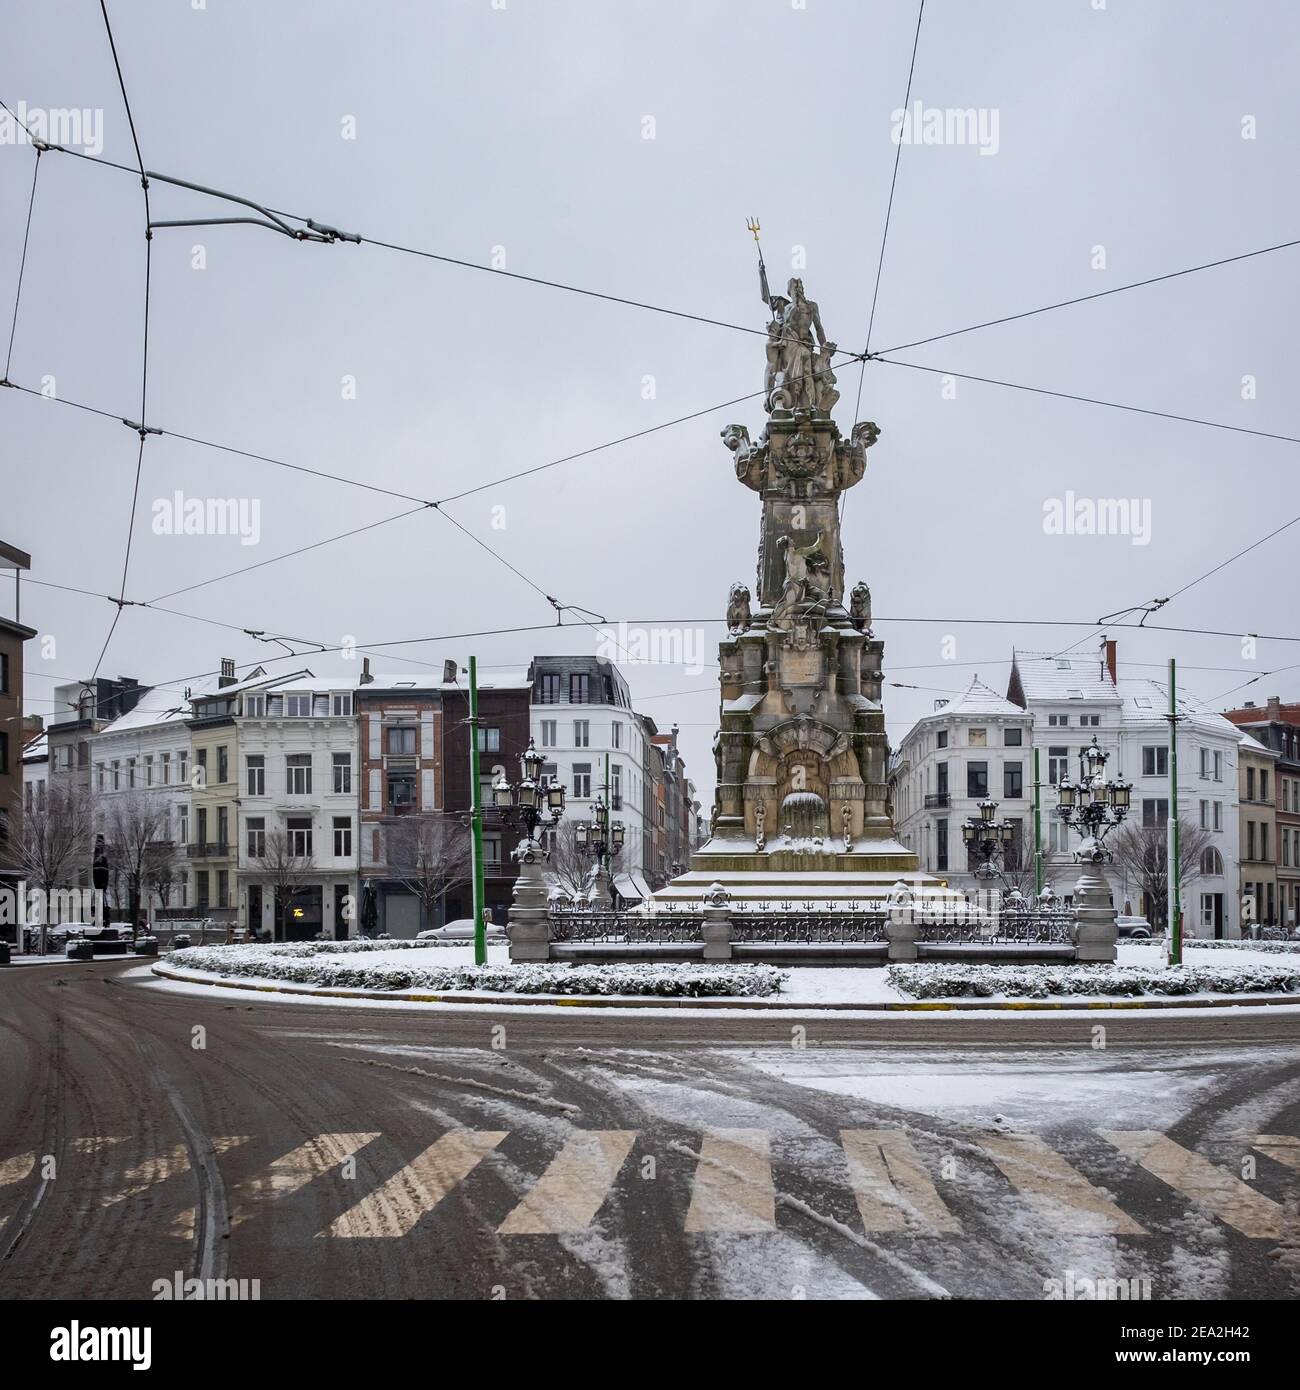 The city center of Antwerp covered in snow. Stock Photo